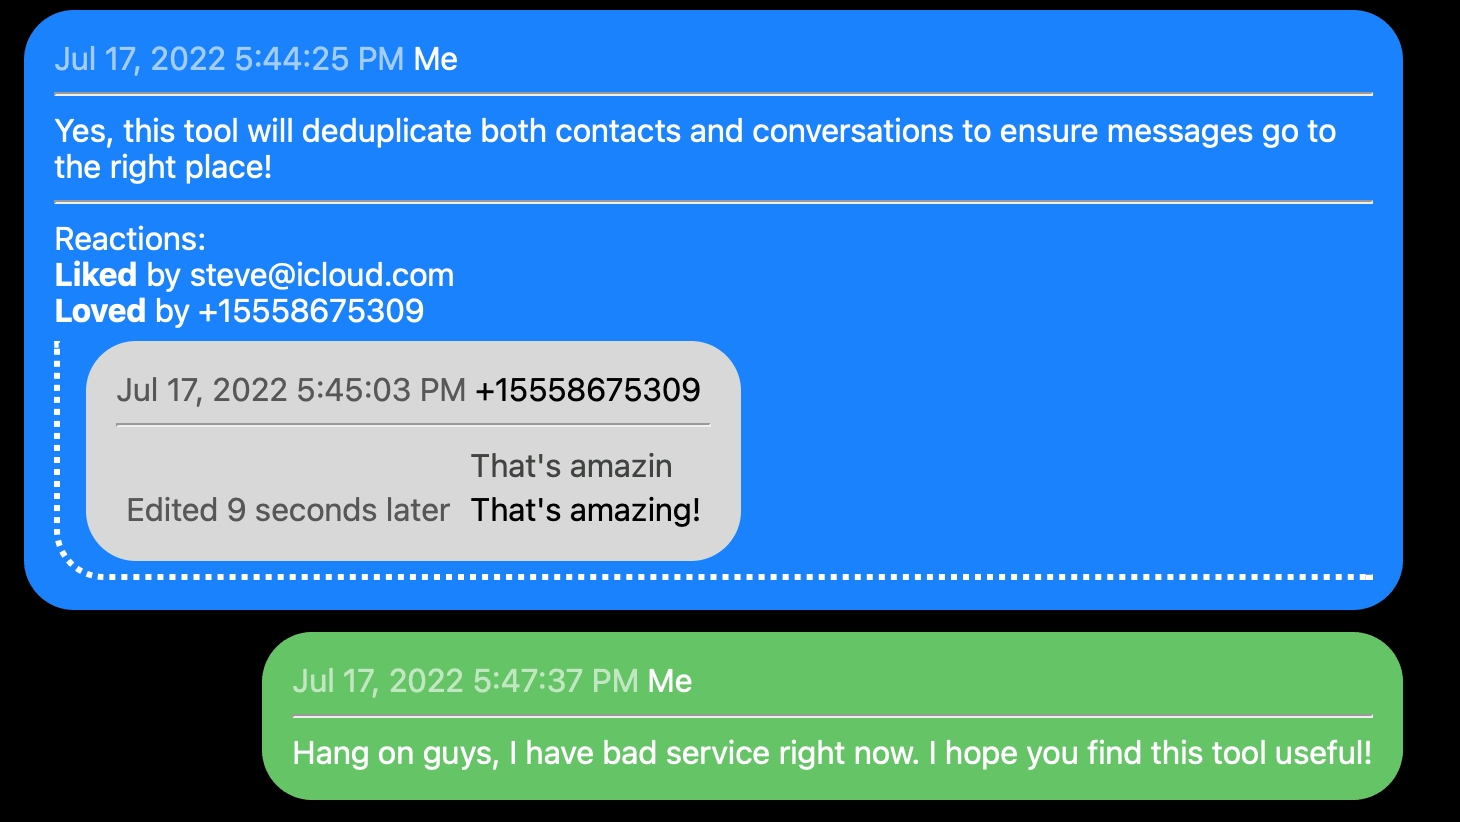 The results of the iMessage-exporter tool showing both iMessages and SMS texts